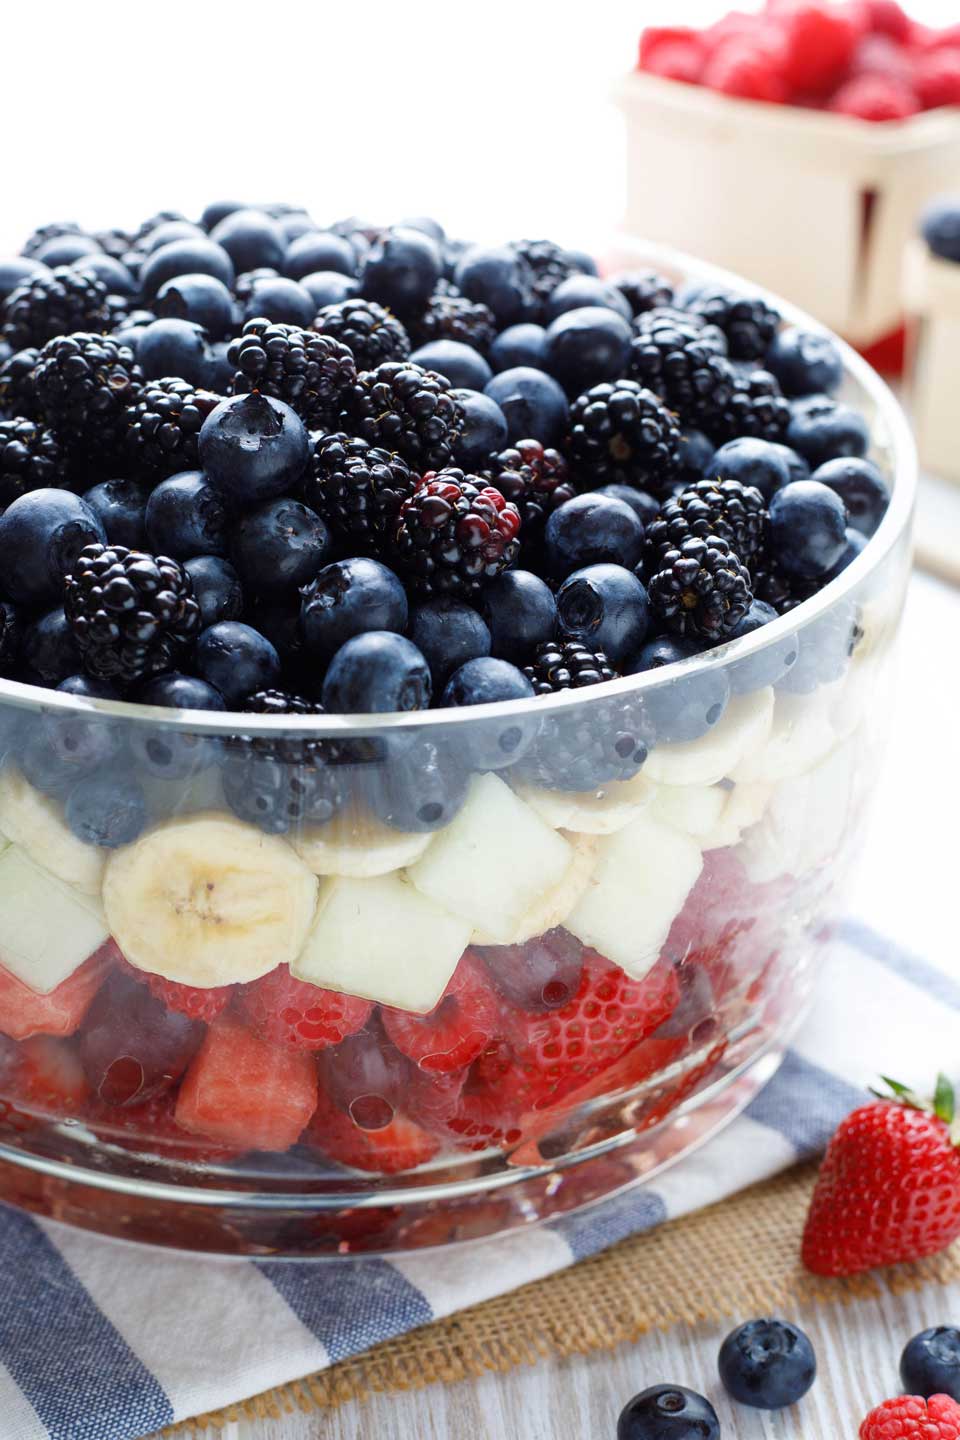 Clear glass bowl with a layer of red fruit, topped by a layer of white fruit, and then a layer of blue fruit.